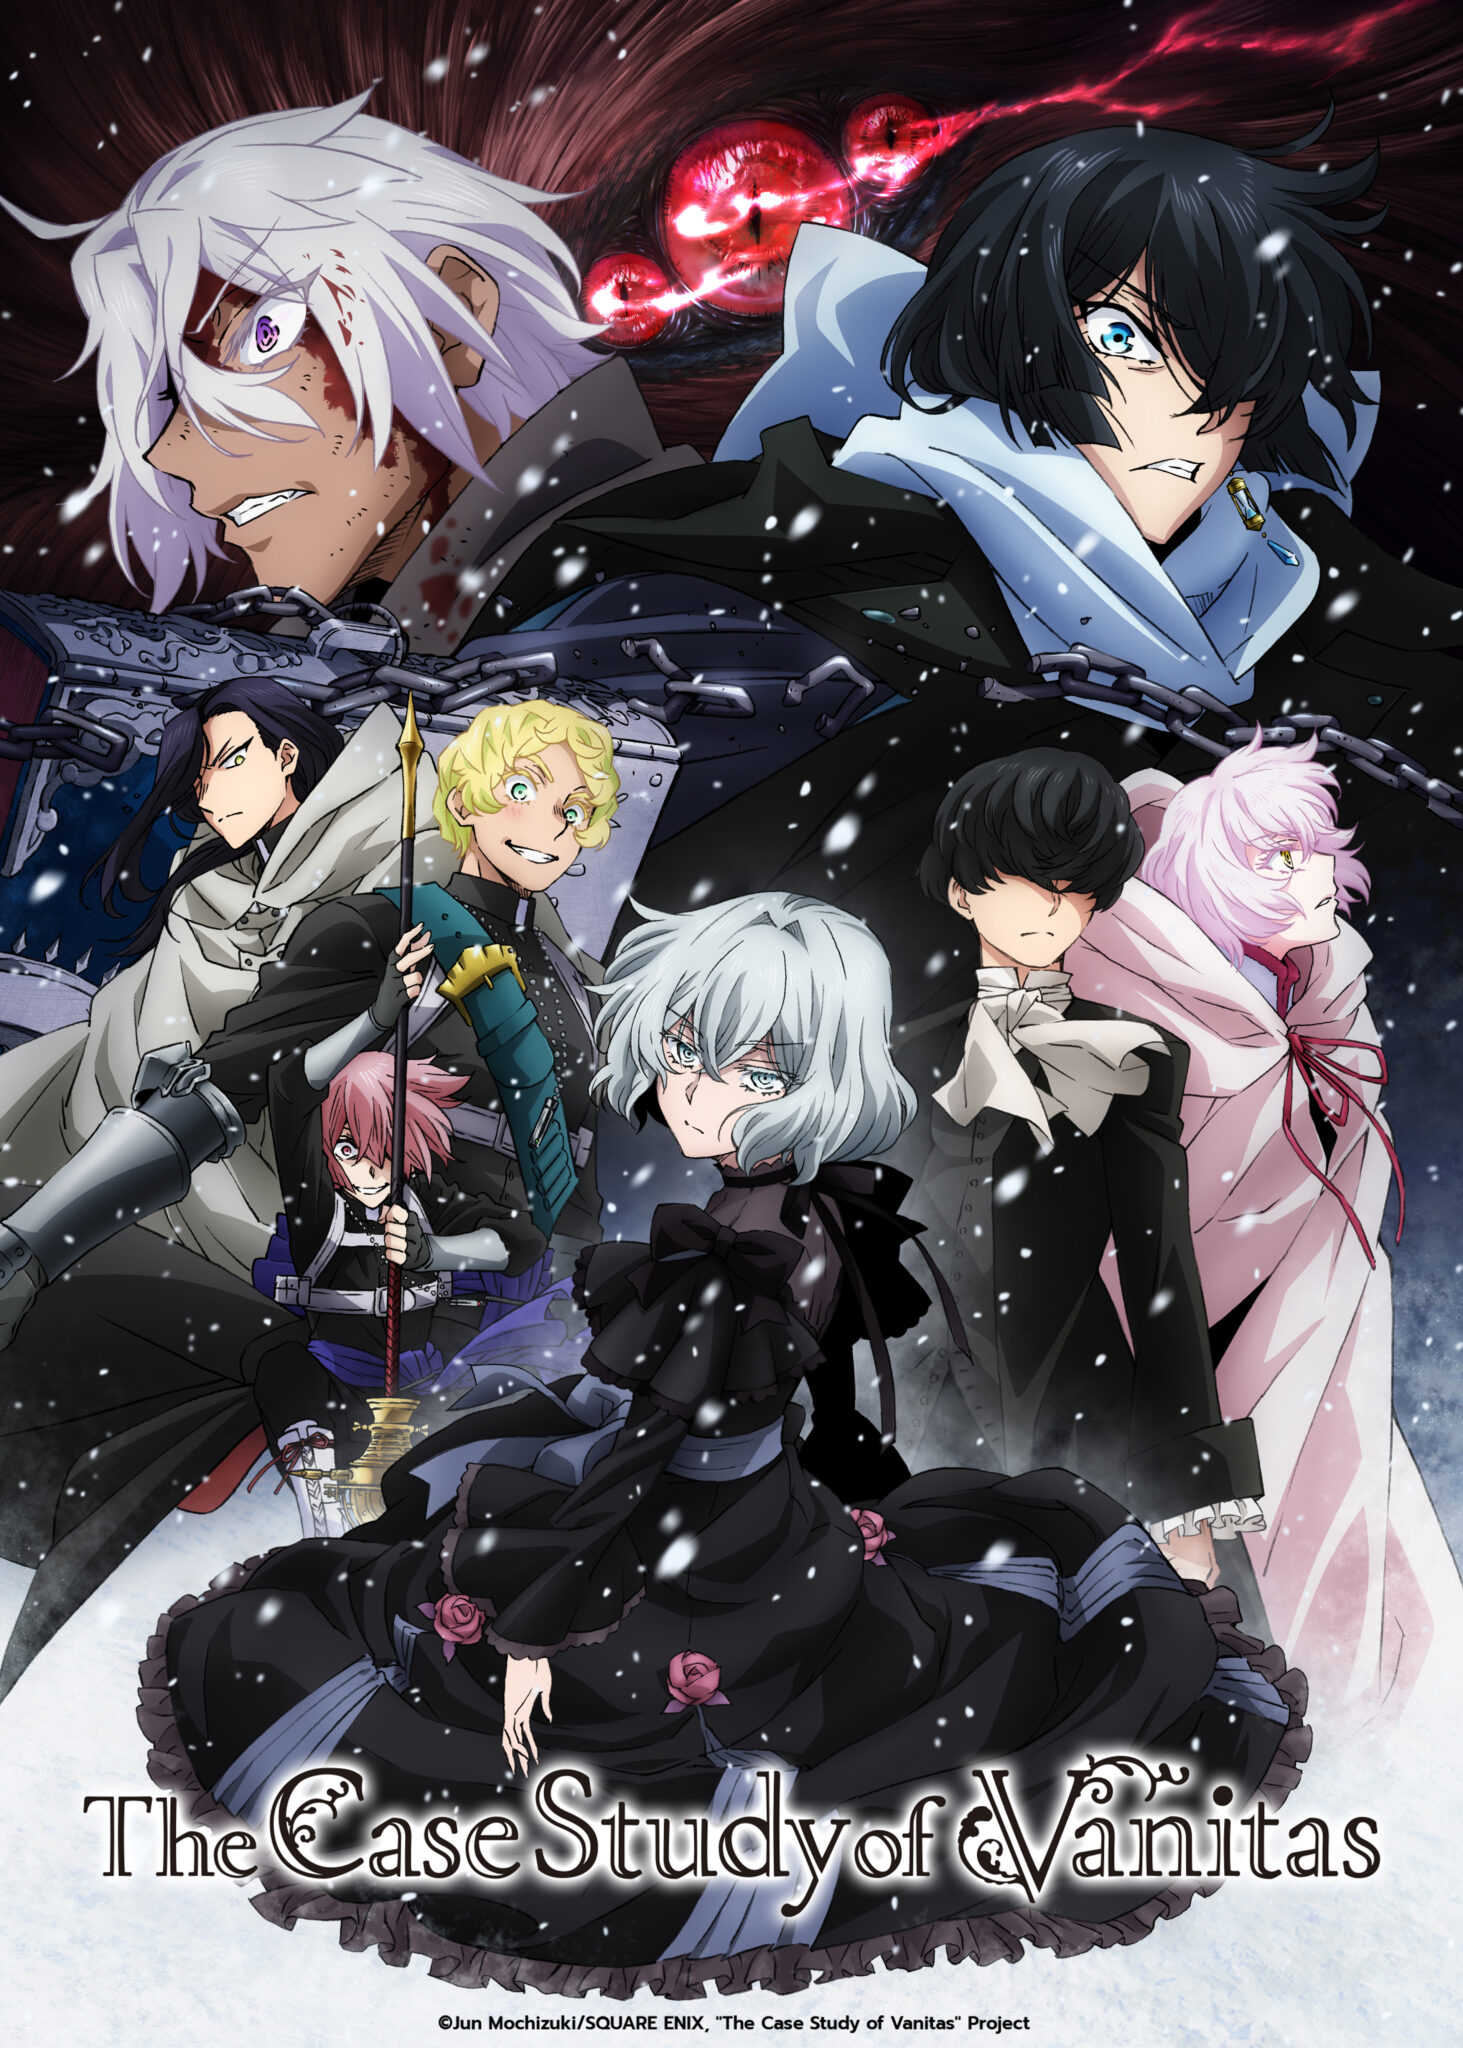 Funimation Announces Winter 2022 Anime Simulcast Slate with ARIFURETA  Season 2, Attack on Titan: The Final Season Part 2, Genius Prince's Guide  to Raising a Nation Out of Debt, My Dress Up